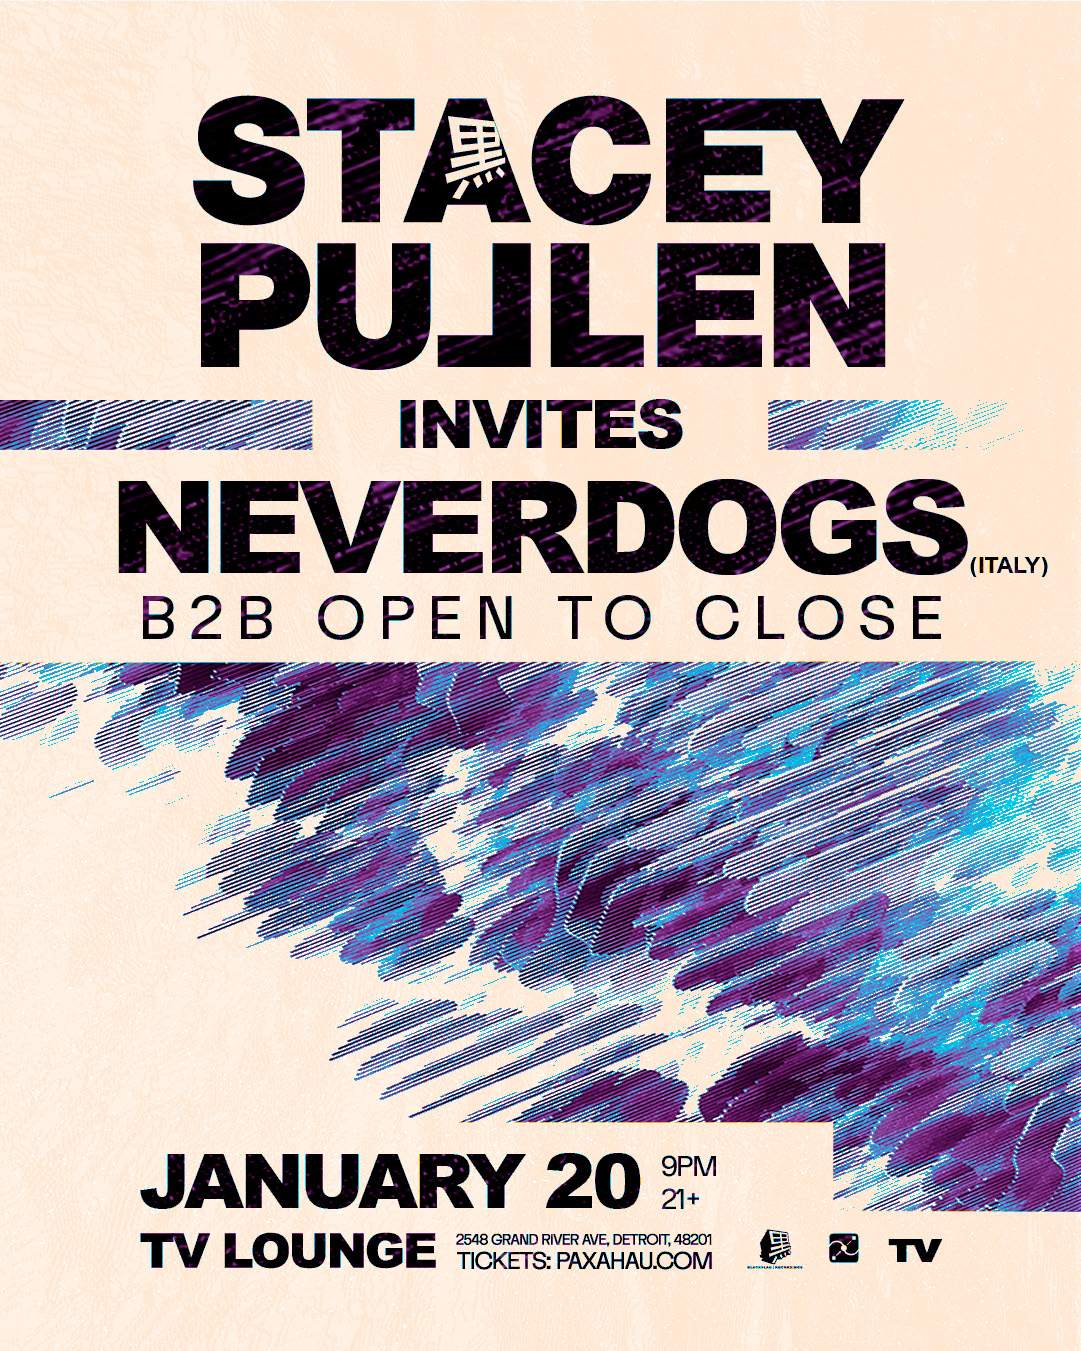 Stacey Pullen Invites Neverdogs B2B Open to Close - フライヤー表